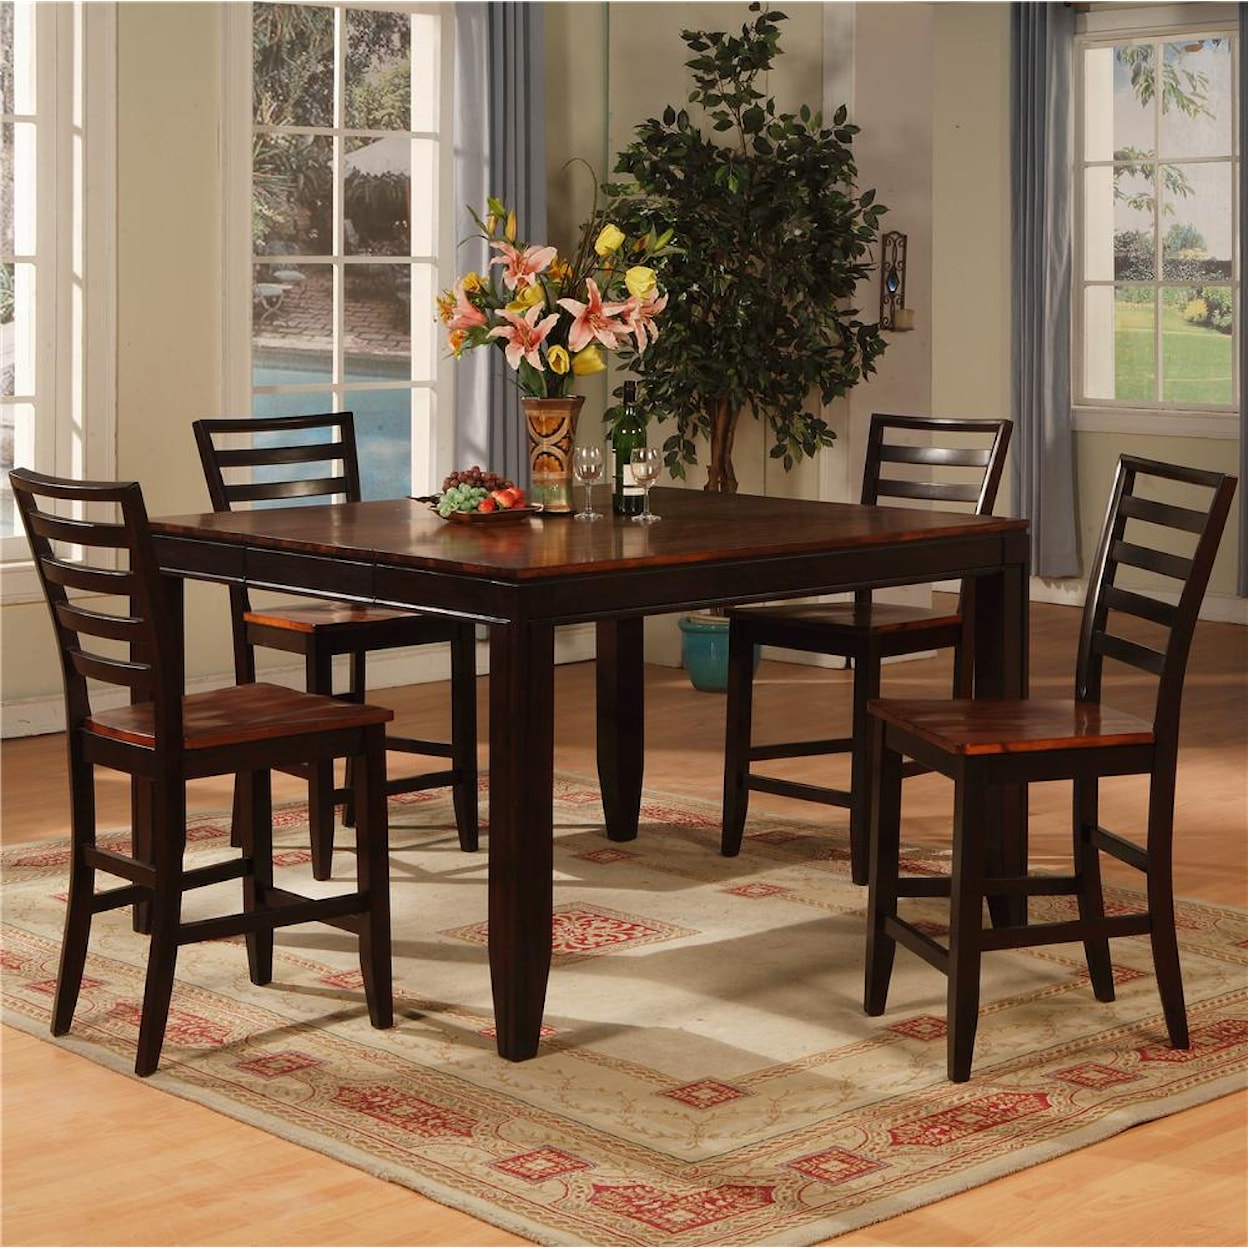 Holland House Adaptable Dining 5 Piece Casual Dining Set